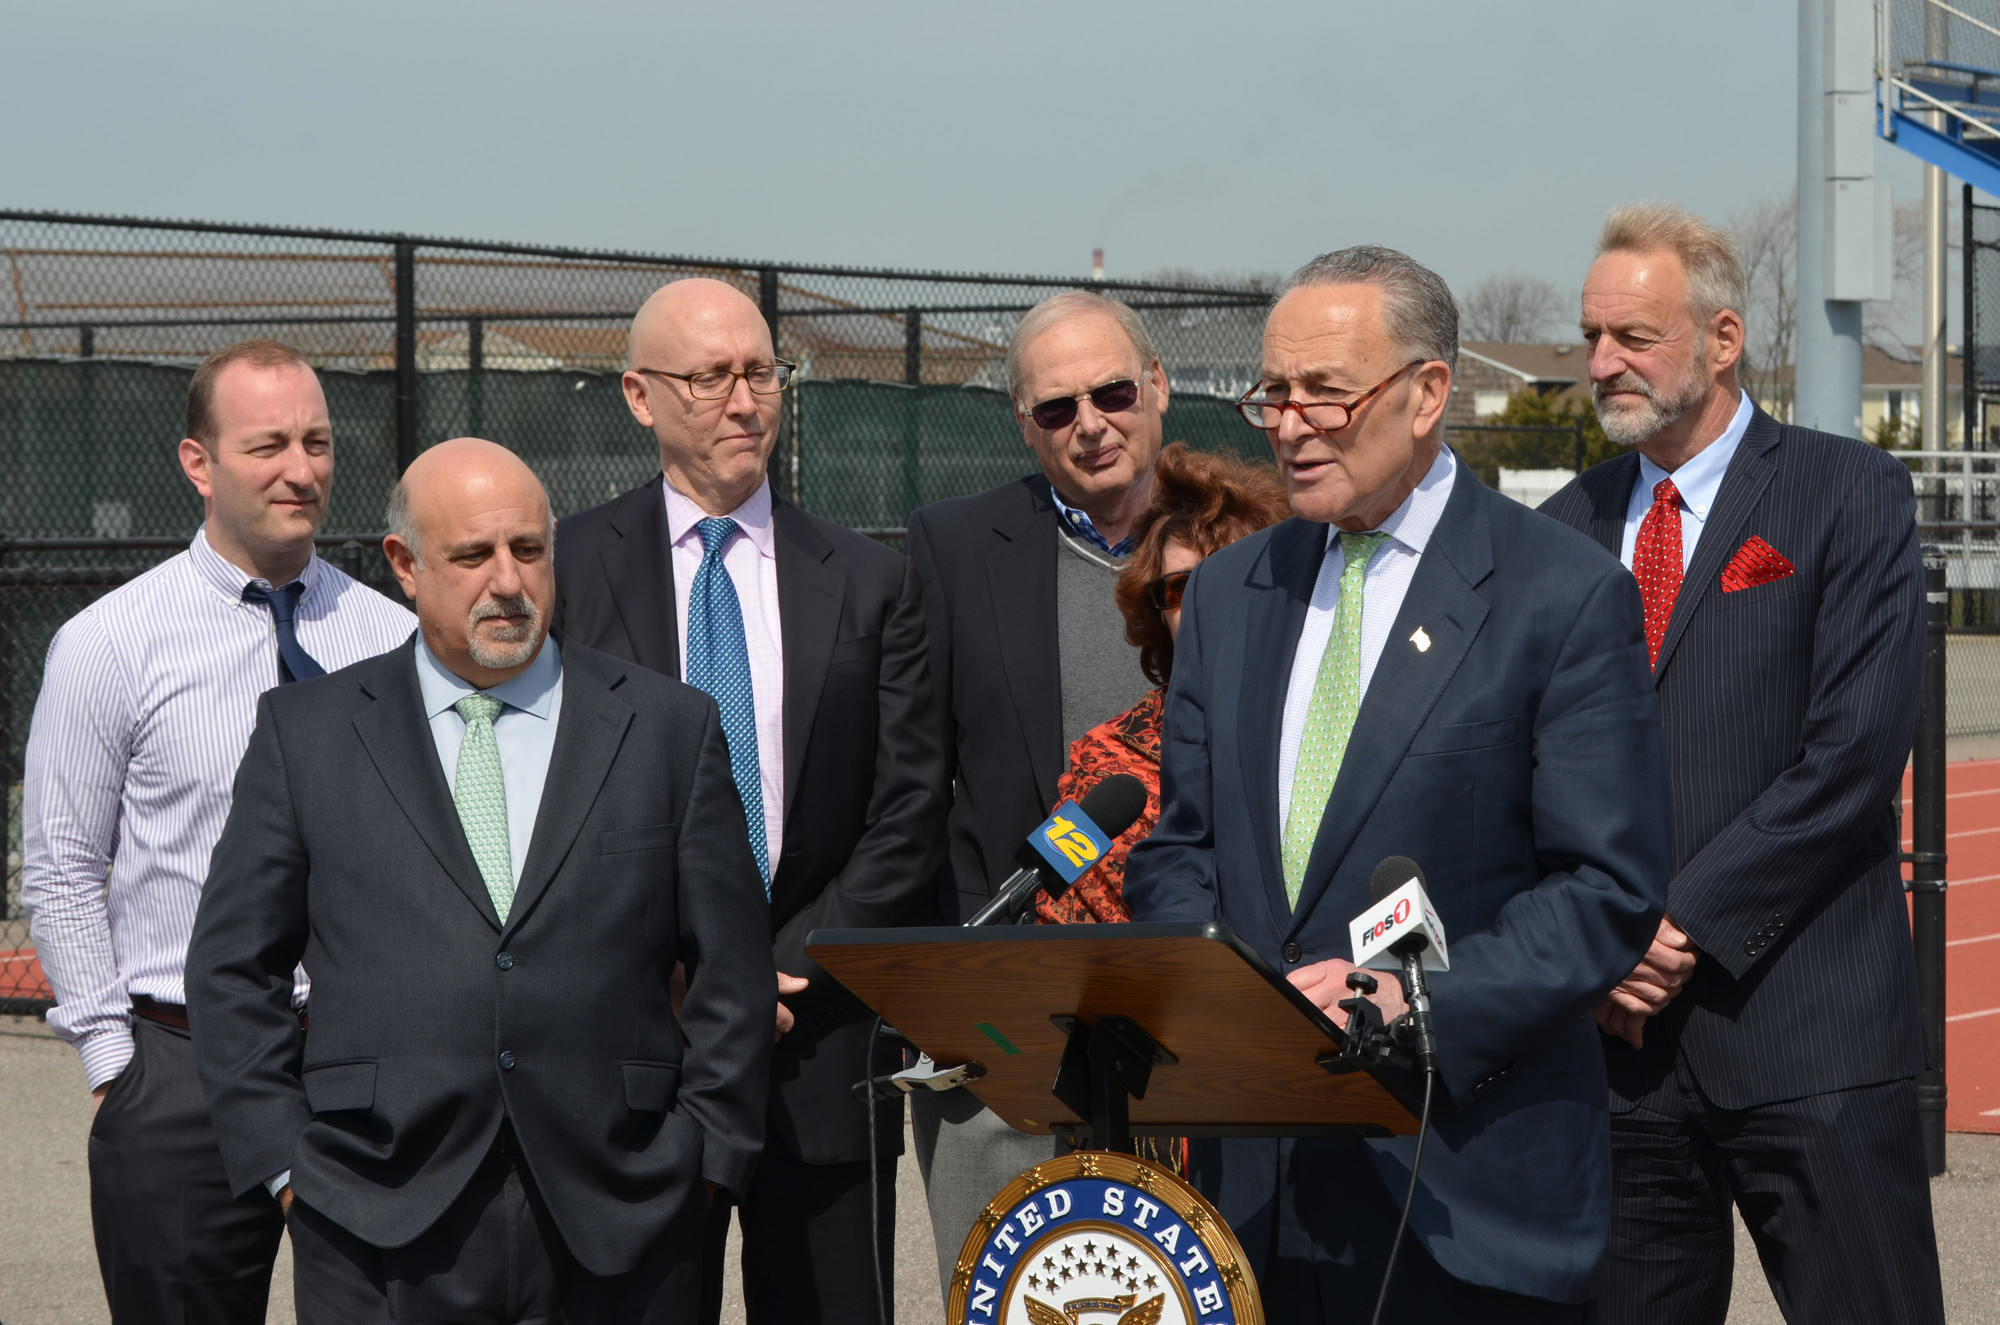 U.S. Sen. Charles Schumer introduced legislation at Long Beach Middle School on Wednesday that would reimburse school districts that have their water tested for lead.